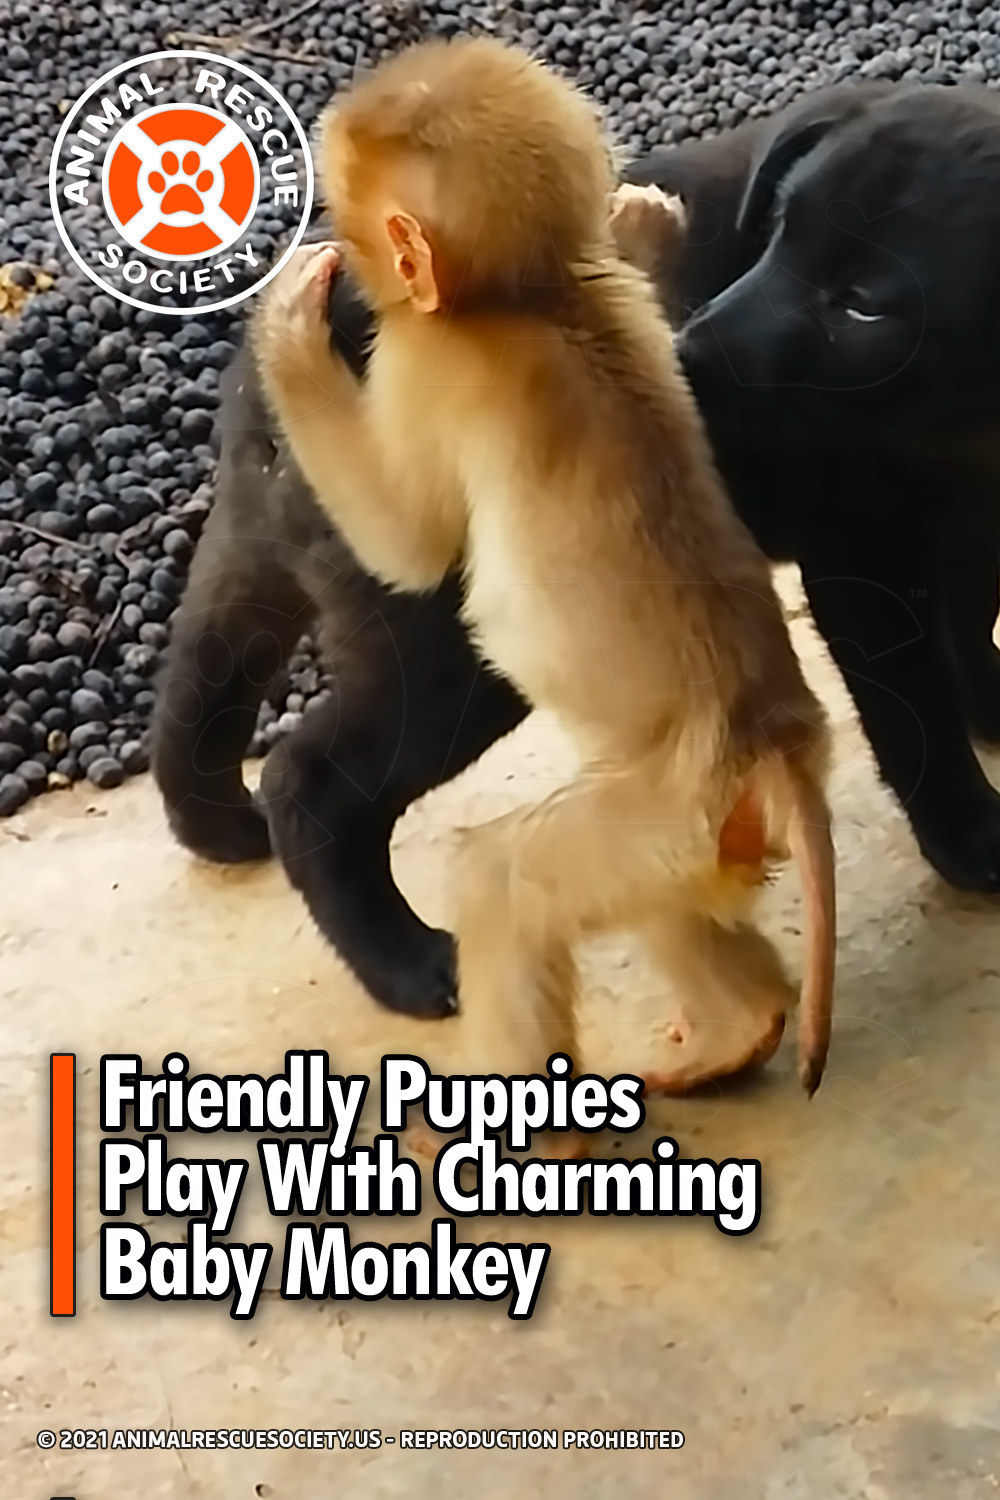 Friendly Puppies Play With Charming Baby Monkey